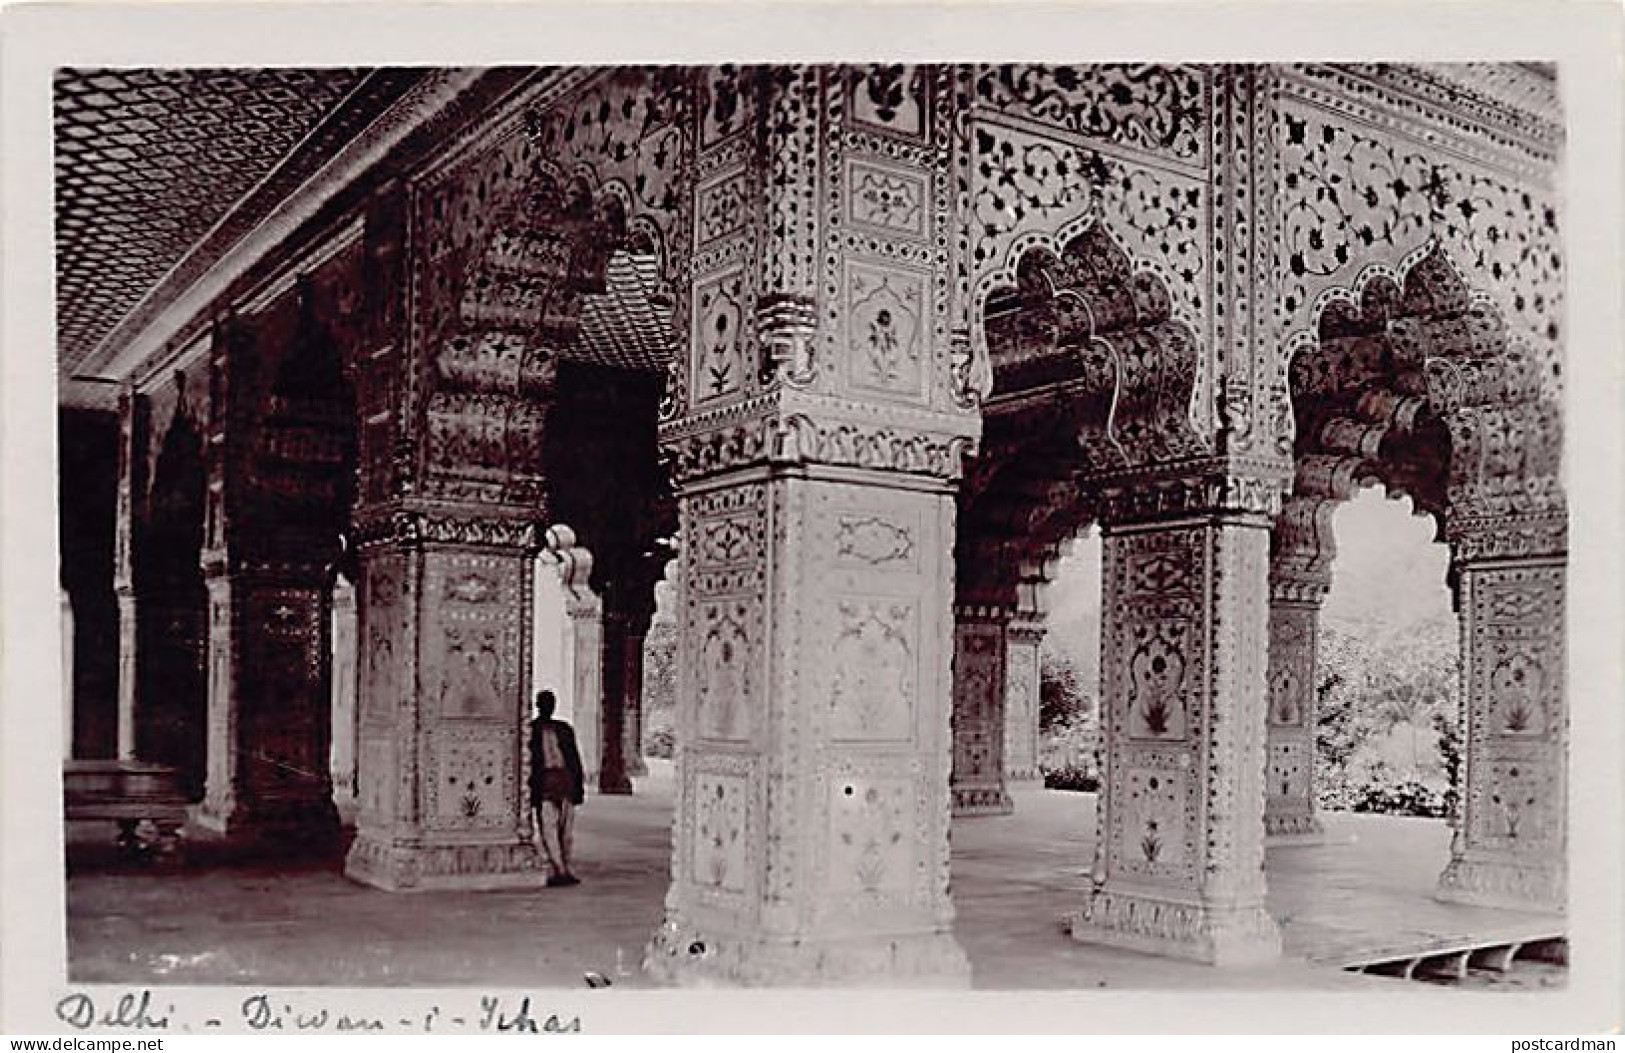 India - DELHI - Diwan-i-Khas (Red Fort) - REAL PHOTO - Publ. Unknown  - India